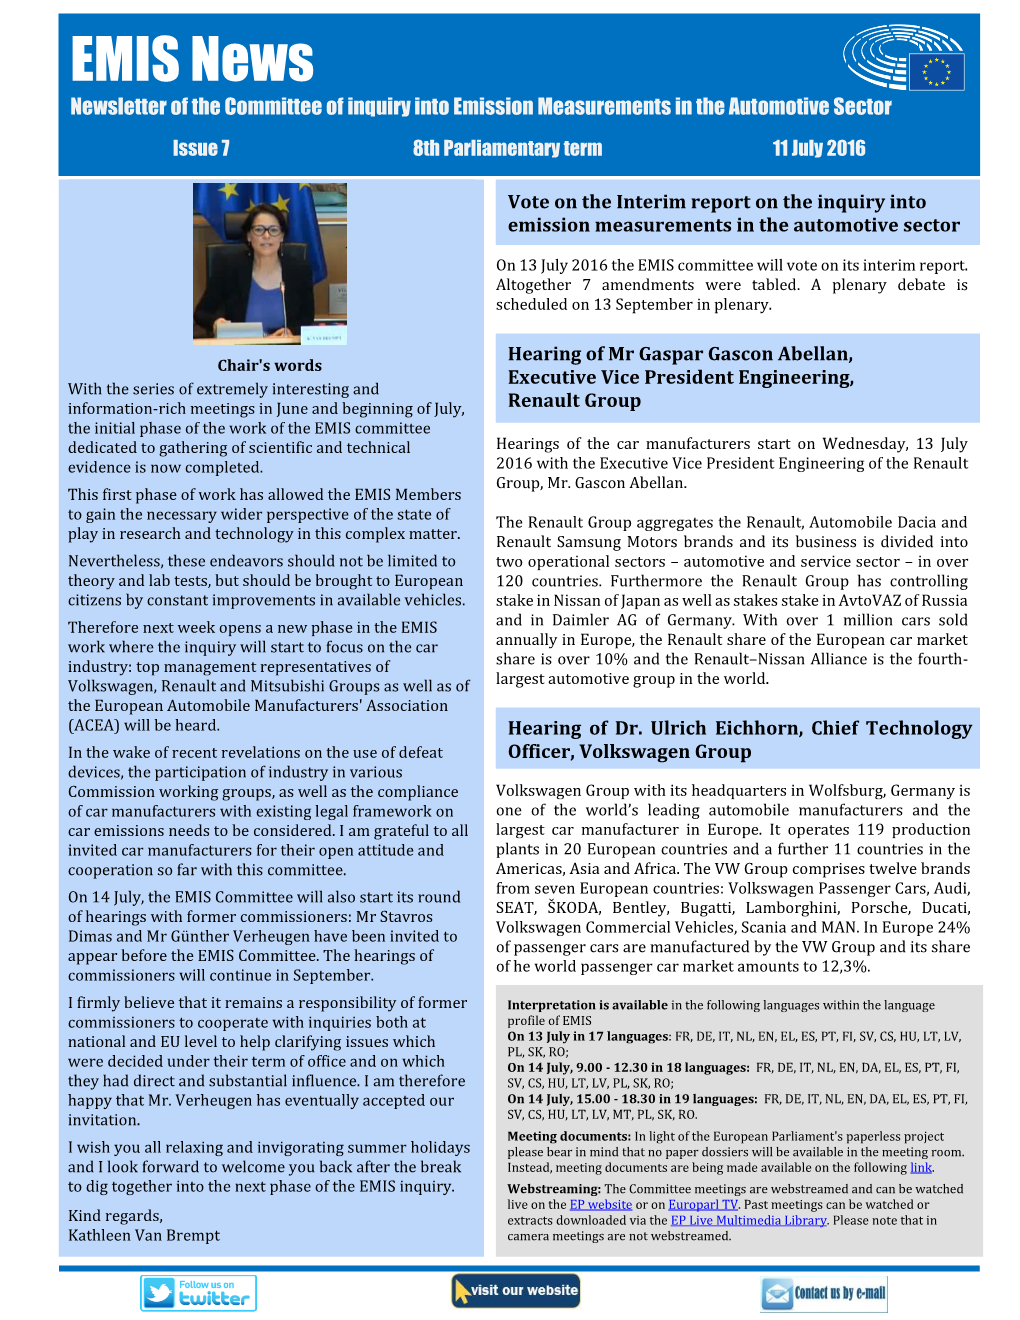 EMIS News PAGE 1 Newsletter of the Committee of Inquiry Into Emission Measurements in the Automotive Sector